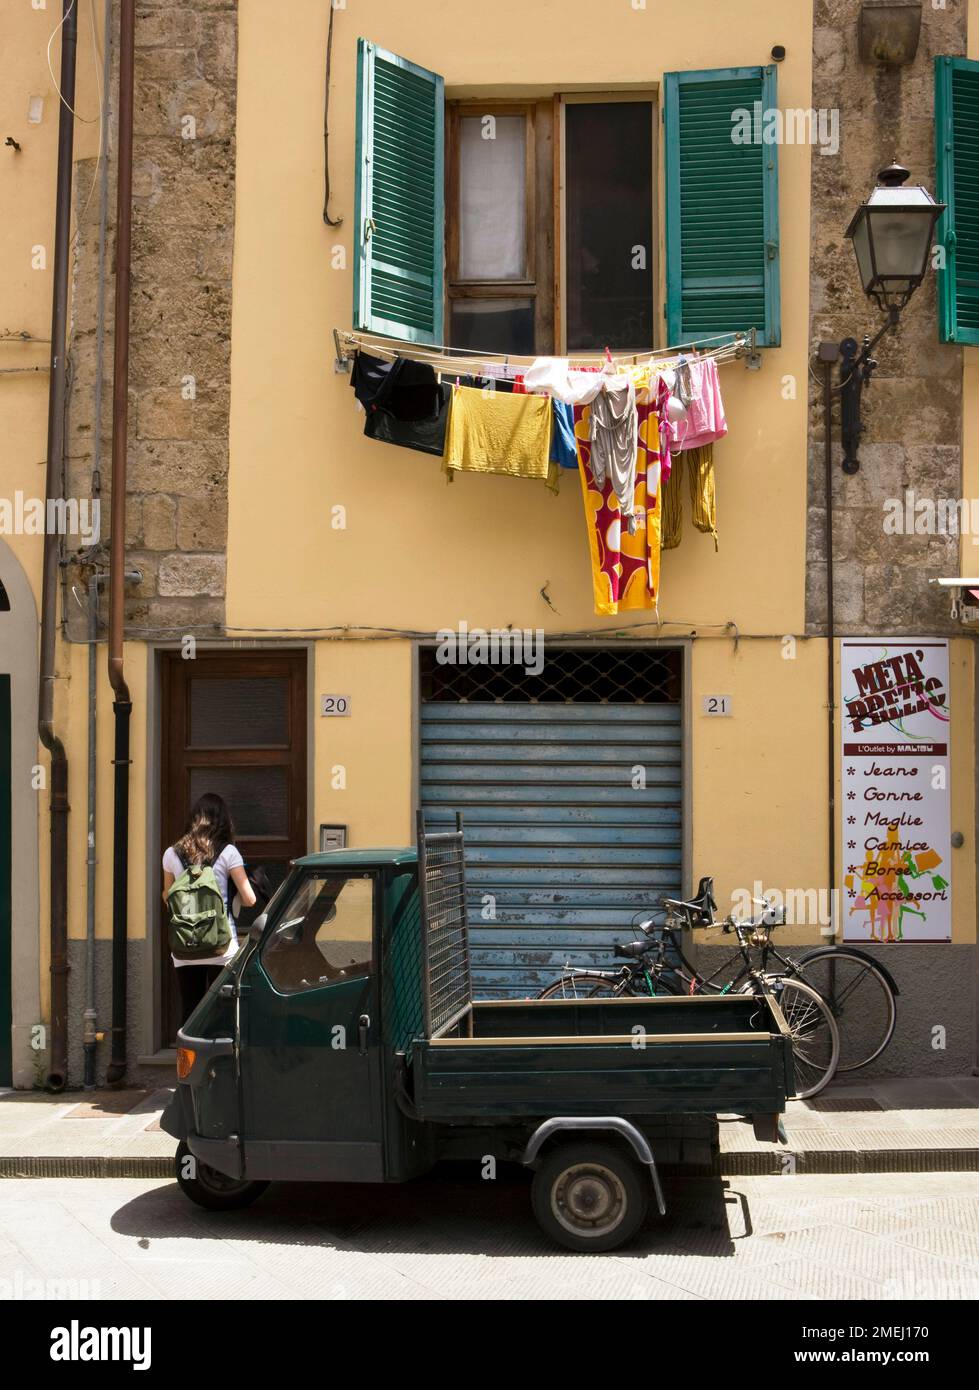 Laundry drying in a back street in Pisa Stock Photo